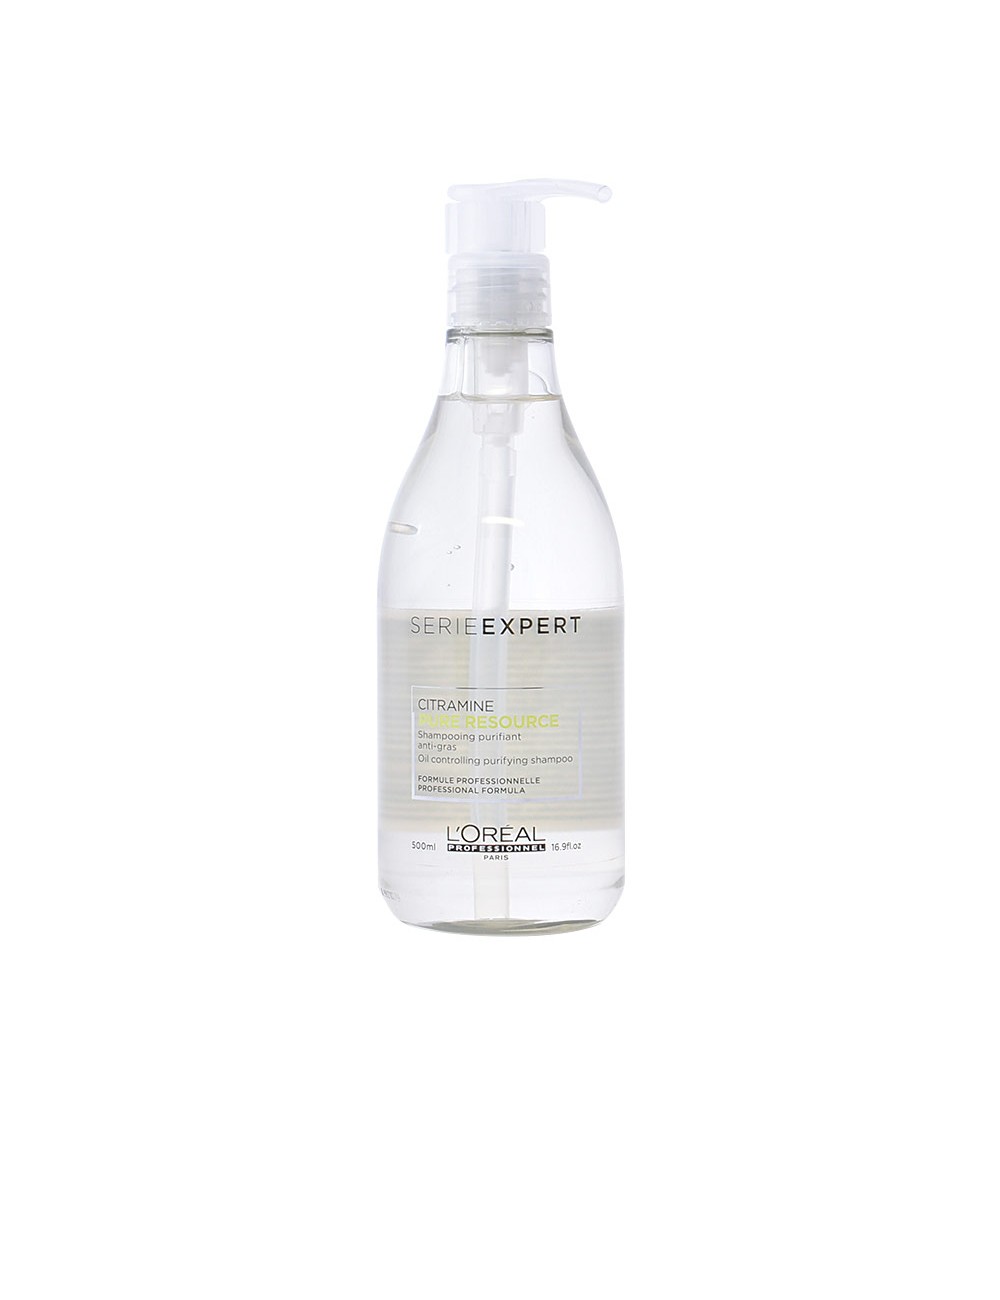 PURE RESOURCE oil controlling purifying shampoo